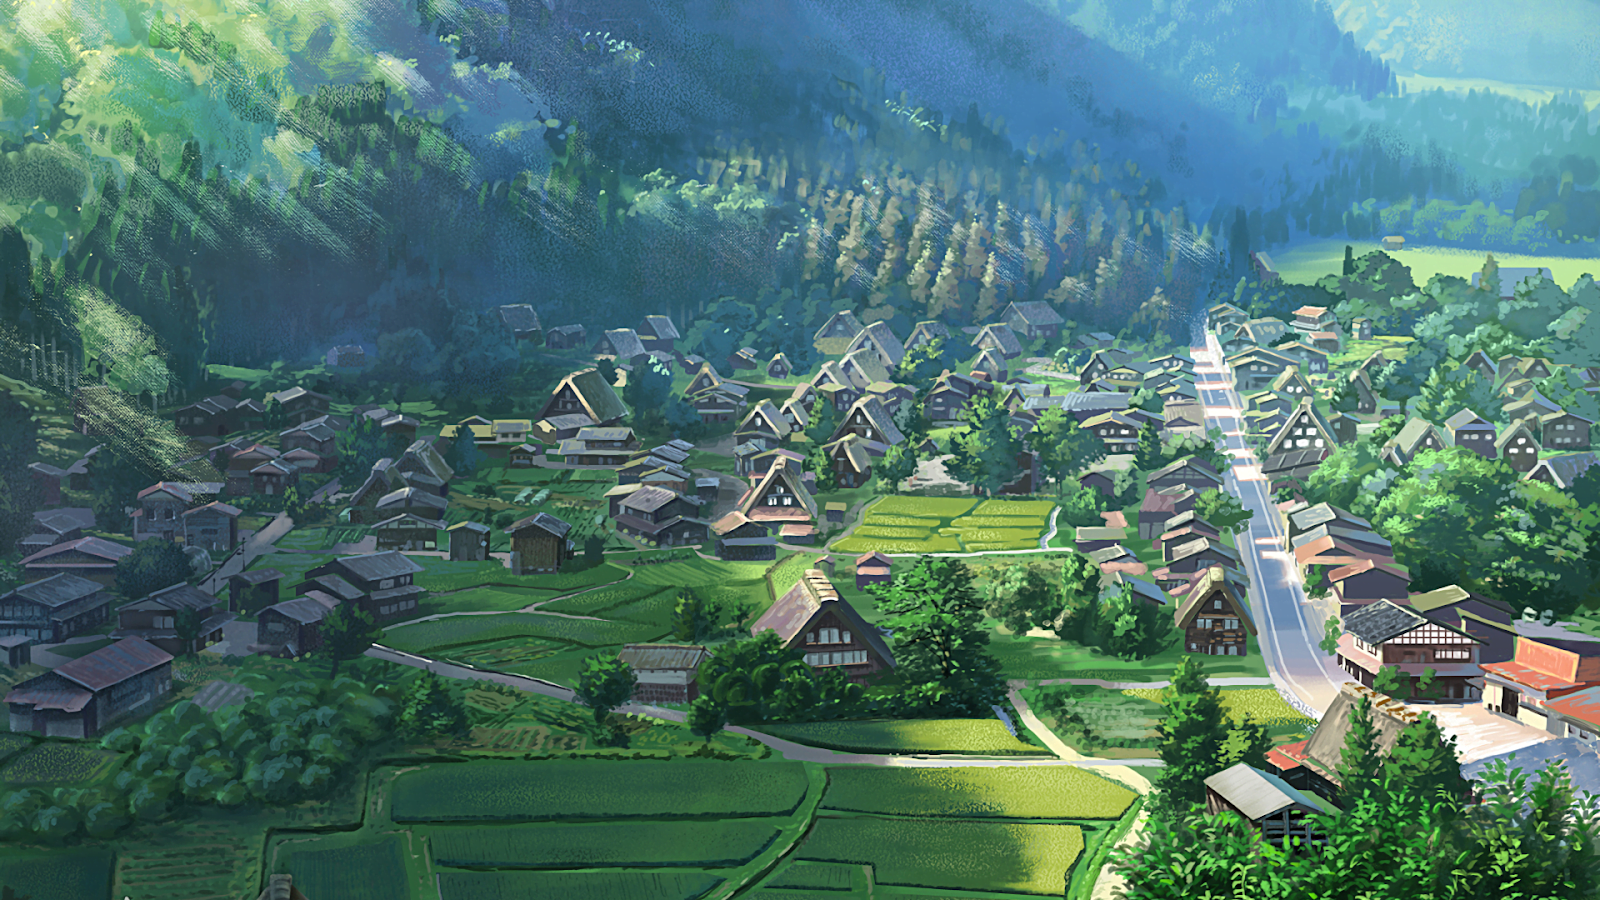 The German Town Which Inspired Japanese Anime 'Attack On Titan'